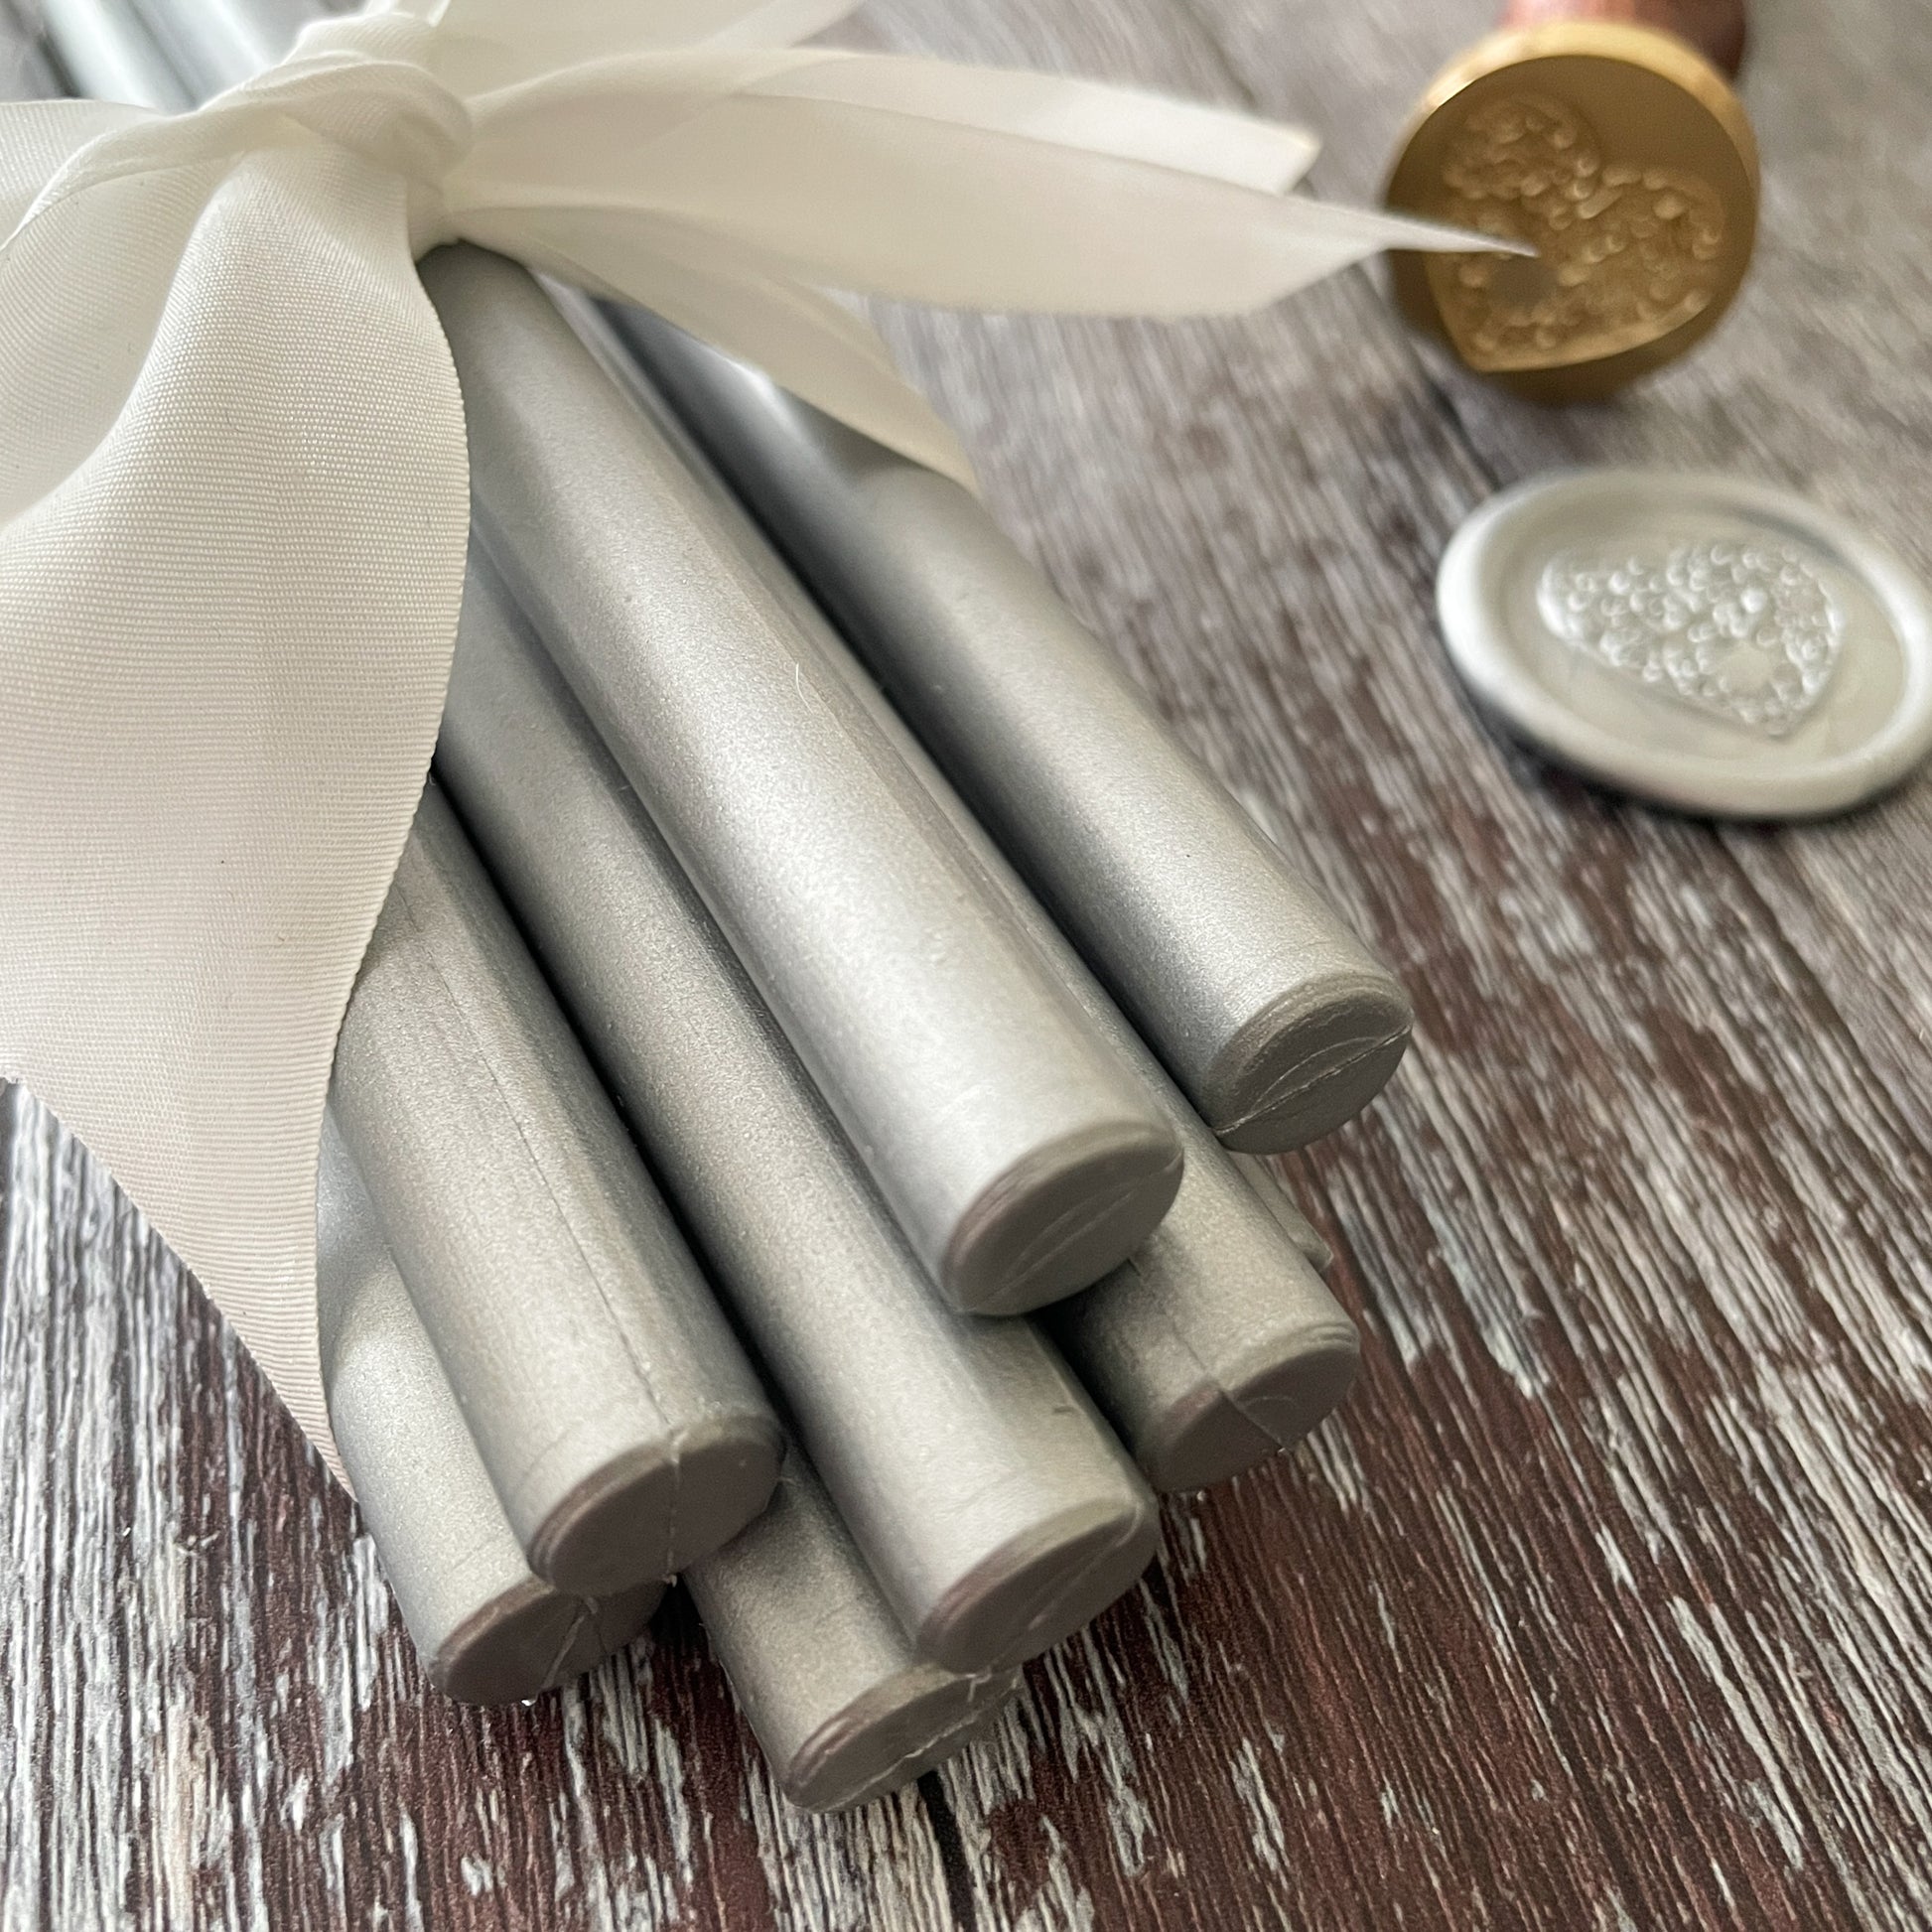 Eco friendly sealing wax sticks in metallic silver.  11mm glue gun sealing wax that can also be used with a melting spoon. Plastic free, Paraffin free and Biodegradable.  Make silver wax seals for decorating invitations, stationery, envelopes, packaging and more.  By The Natural Paper Company